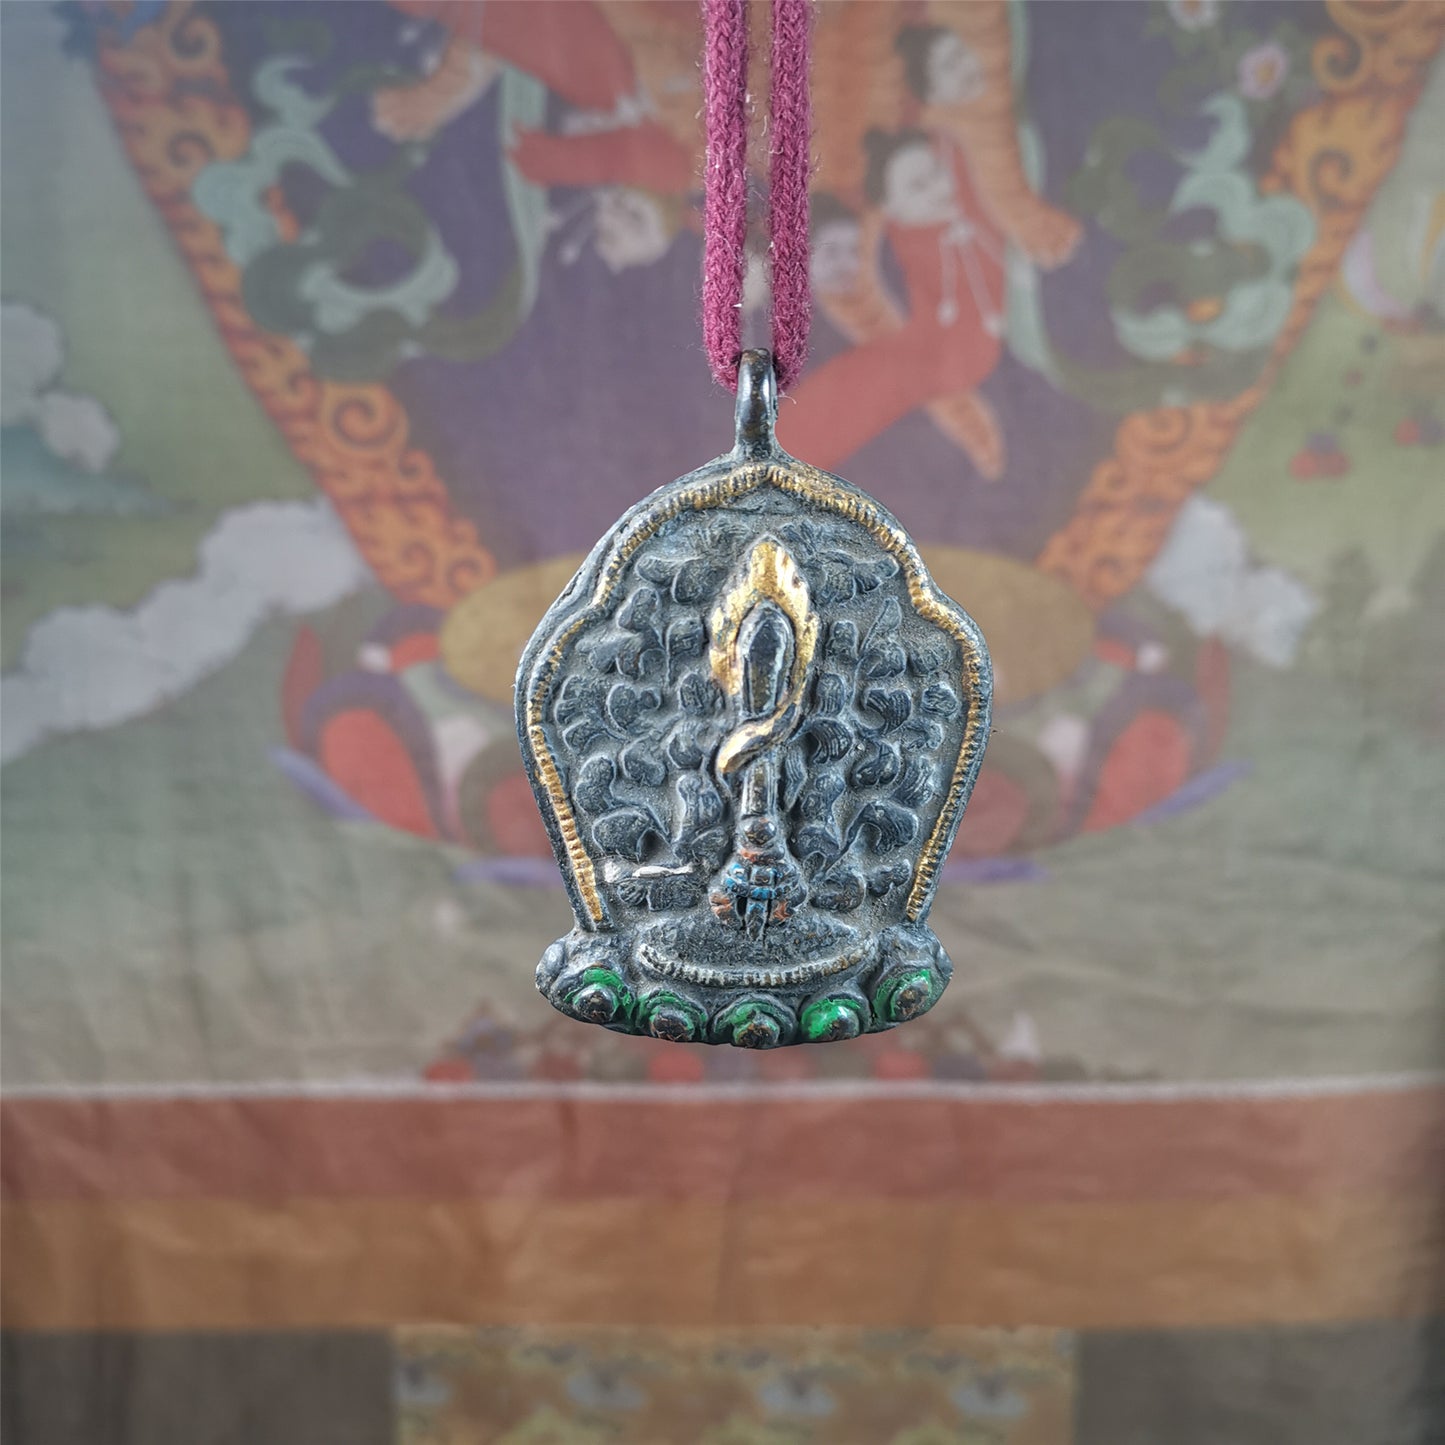 This Fire Sword amulet was collceted from gerze monastery, Tibet,about 30 years old. It's made of copper, a sword hangs on a lotus seat, surrounded by flames,painted mineral pigments.  You can carry it as a necklace,or pendant,or put into your shrine.